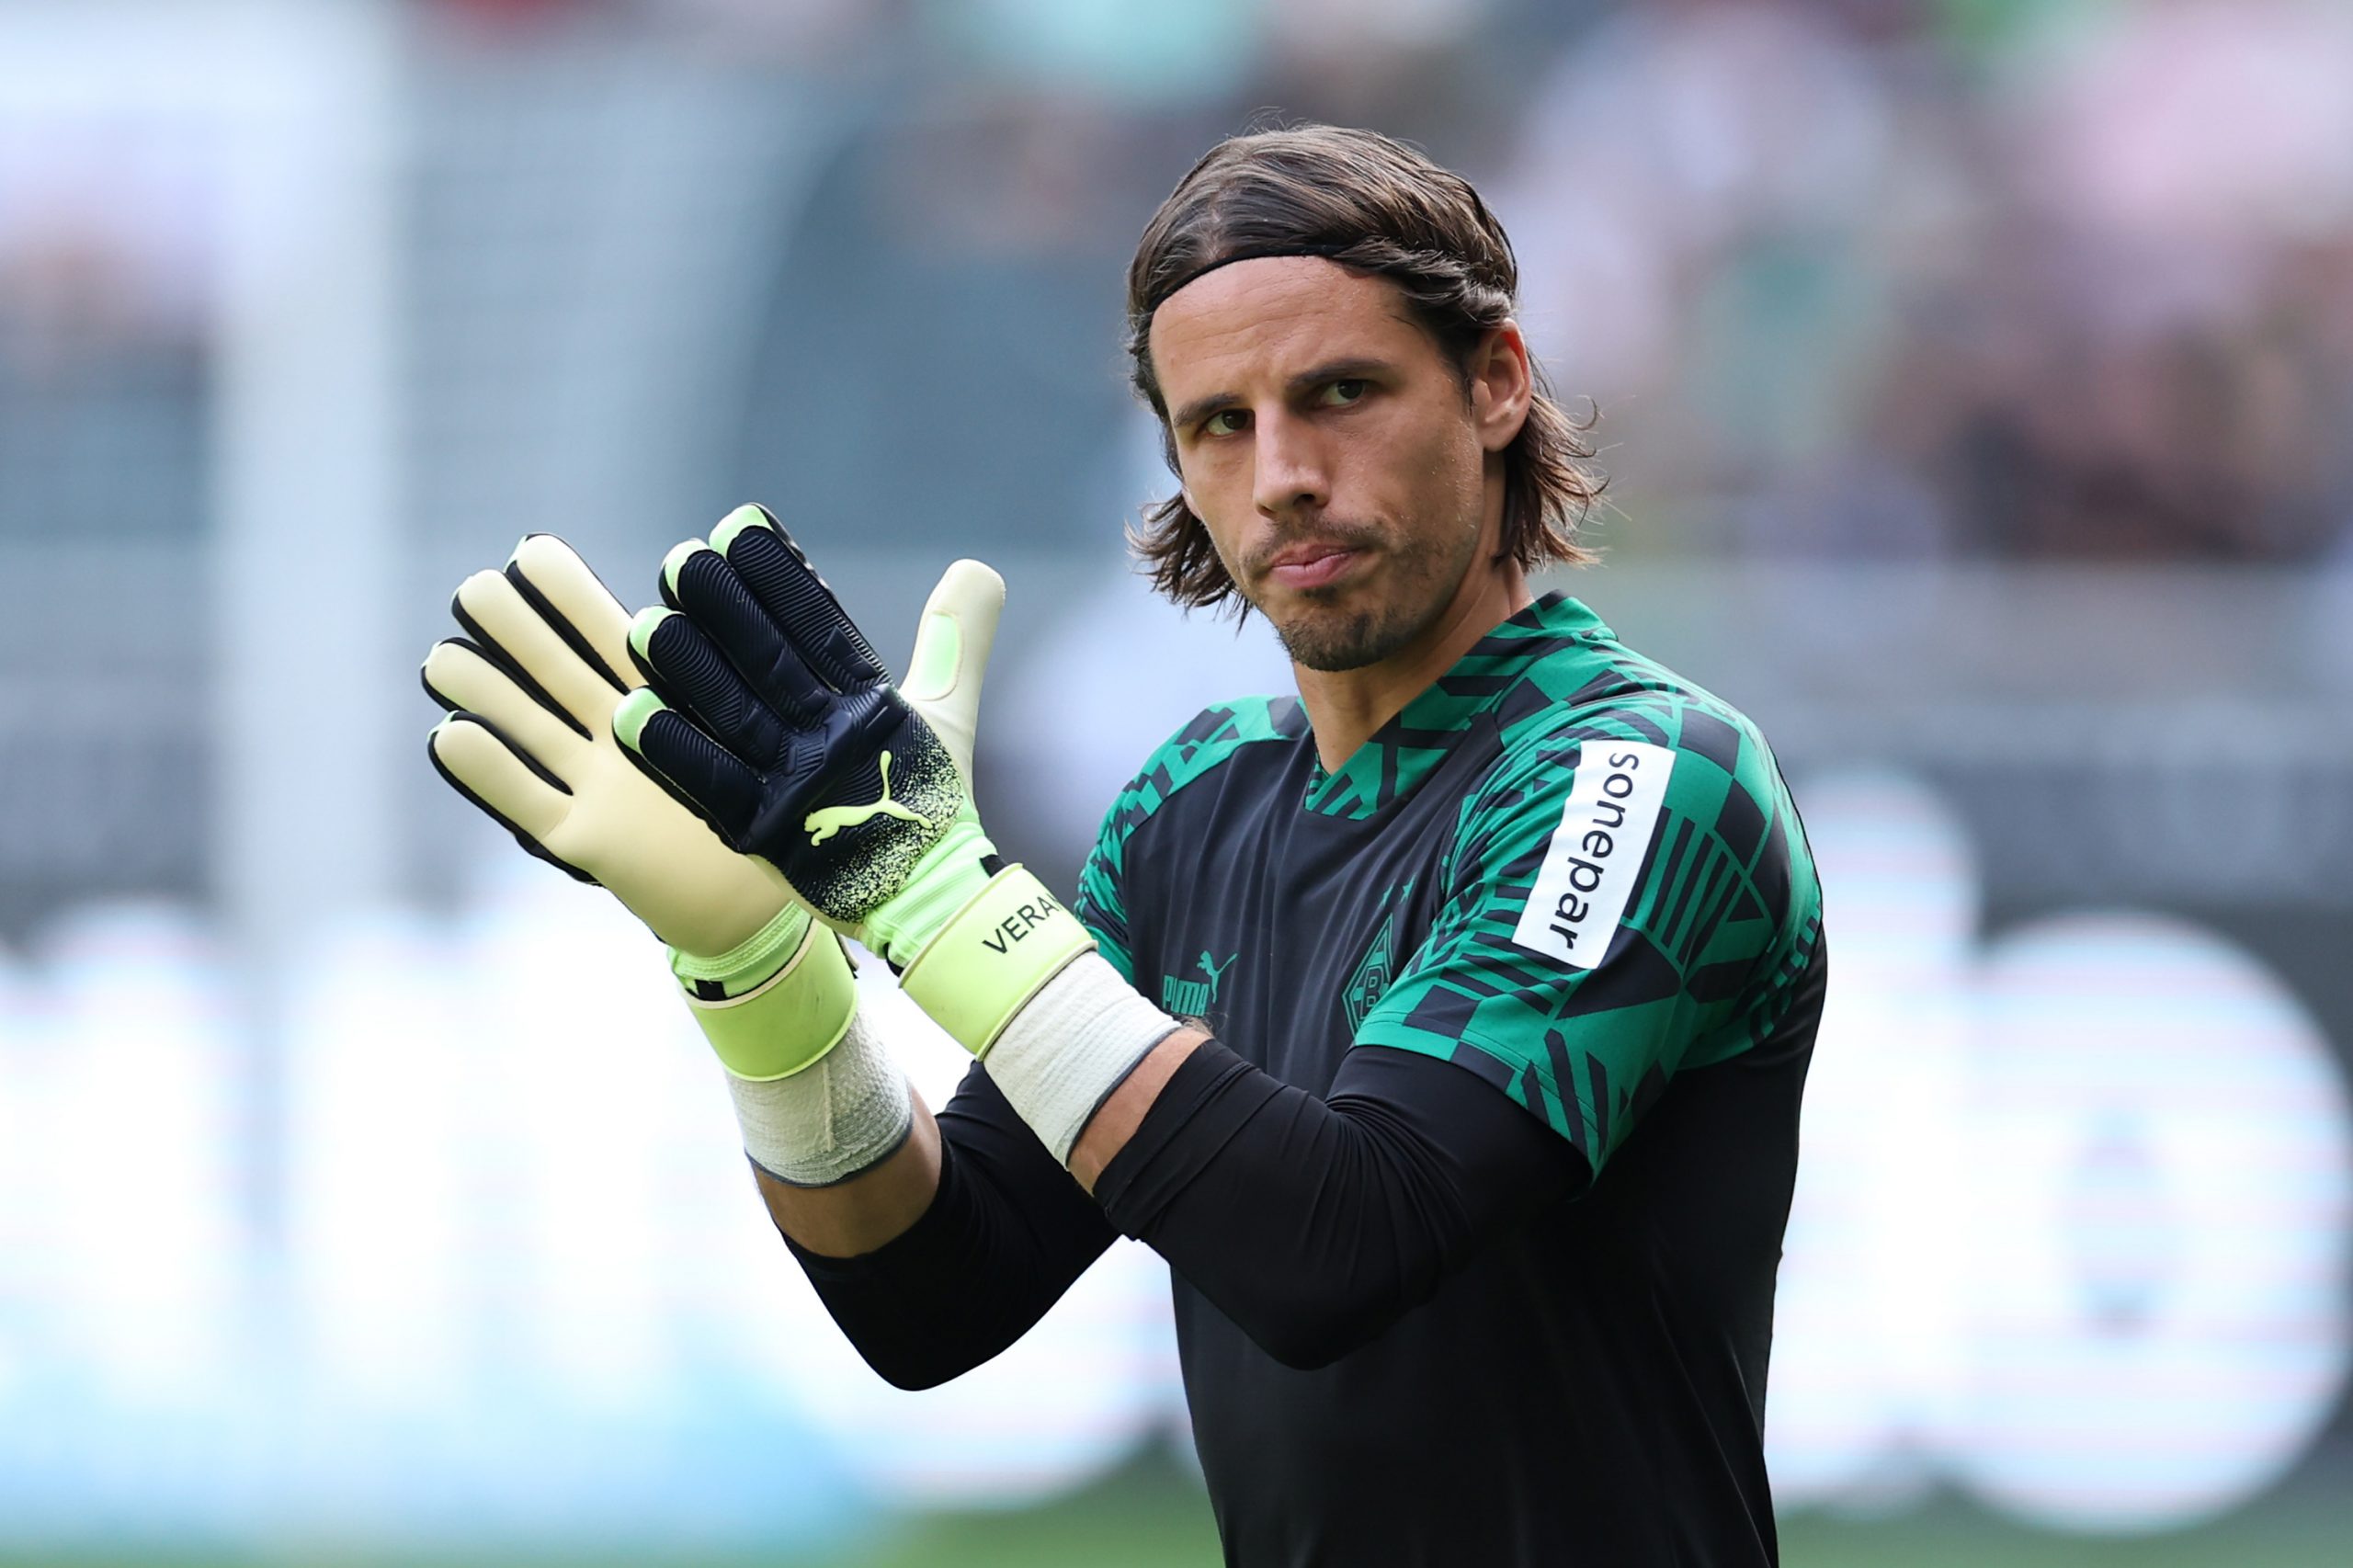 Yann Sommer is willing to move to Bayern Munich - Get German Football News